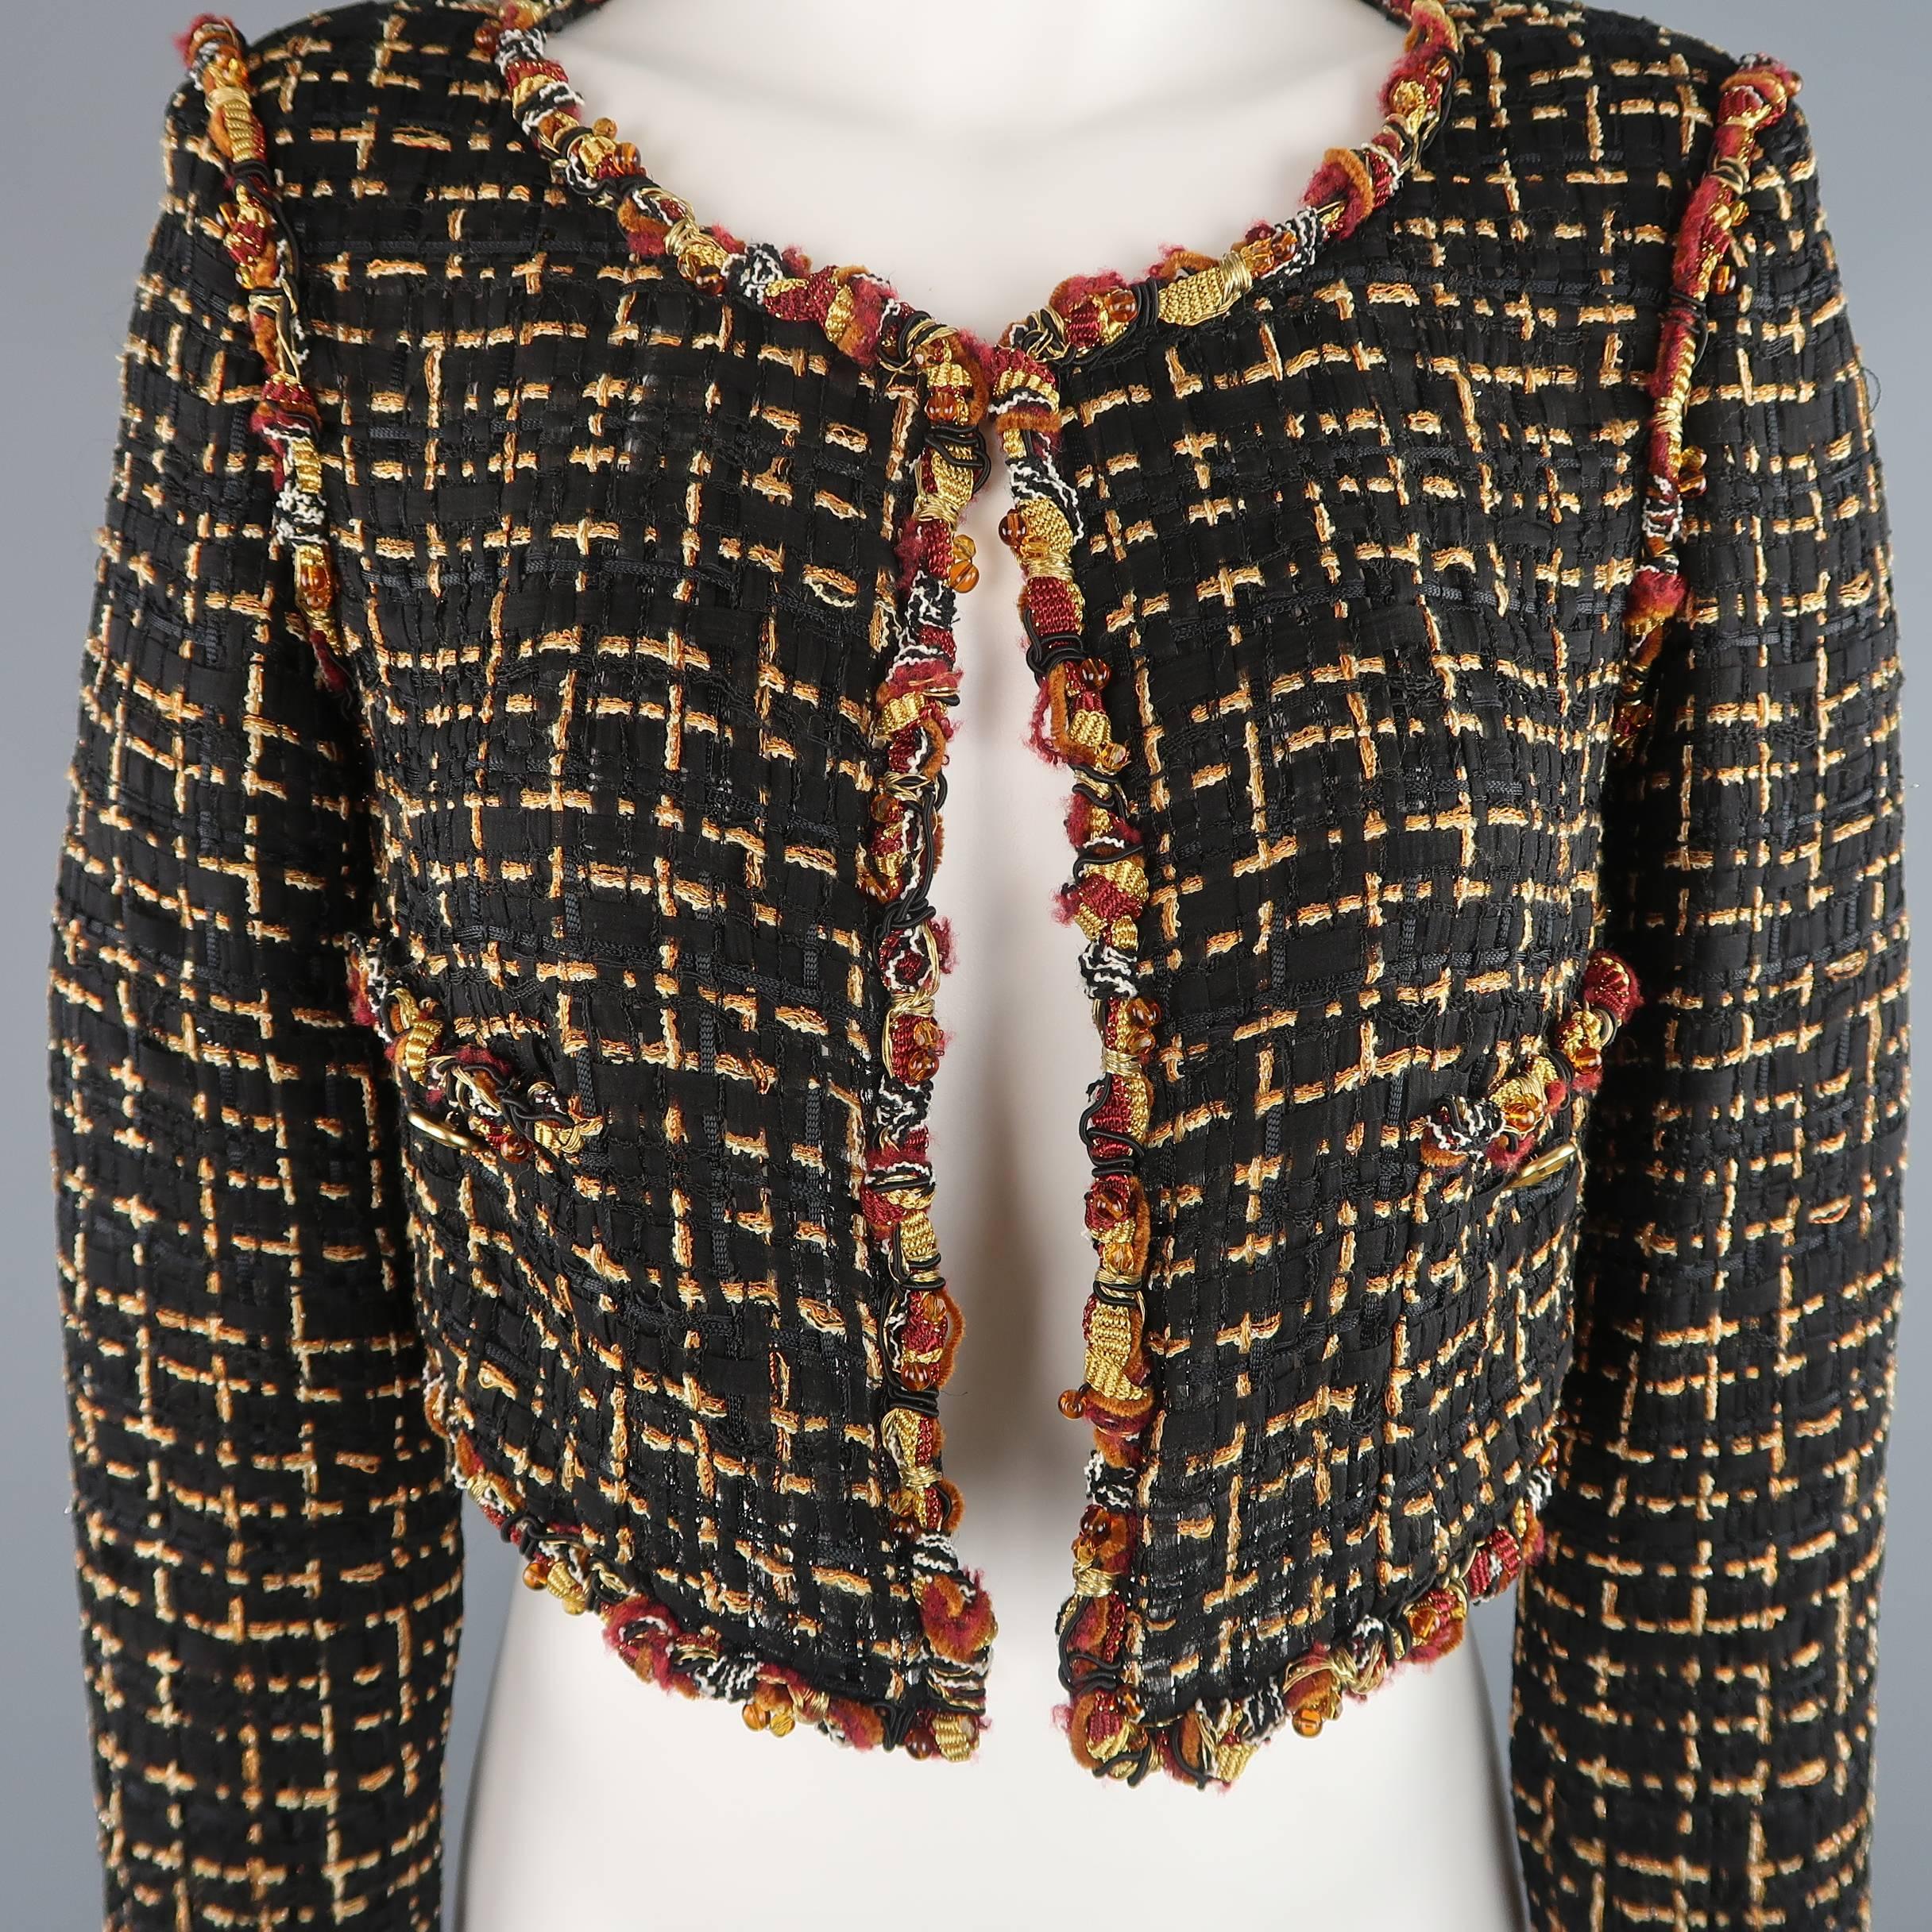 This fabulous cropped CHANEL jacket comes in a light weight black and gold silk blend woven Lesage and features a round neckline with single hook eye closure, double faux pockets with gold enamel buttons, three quarter sleeves, and burgundy and